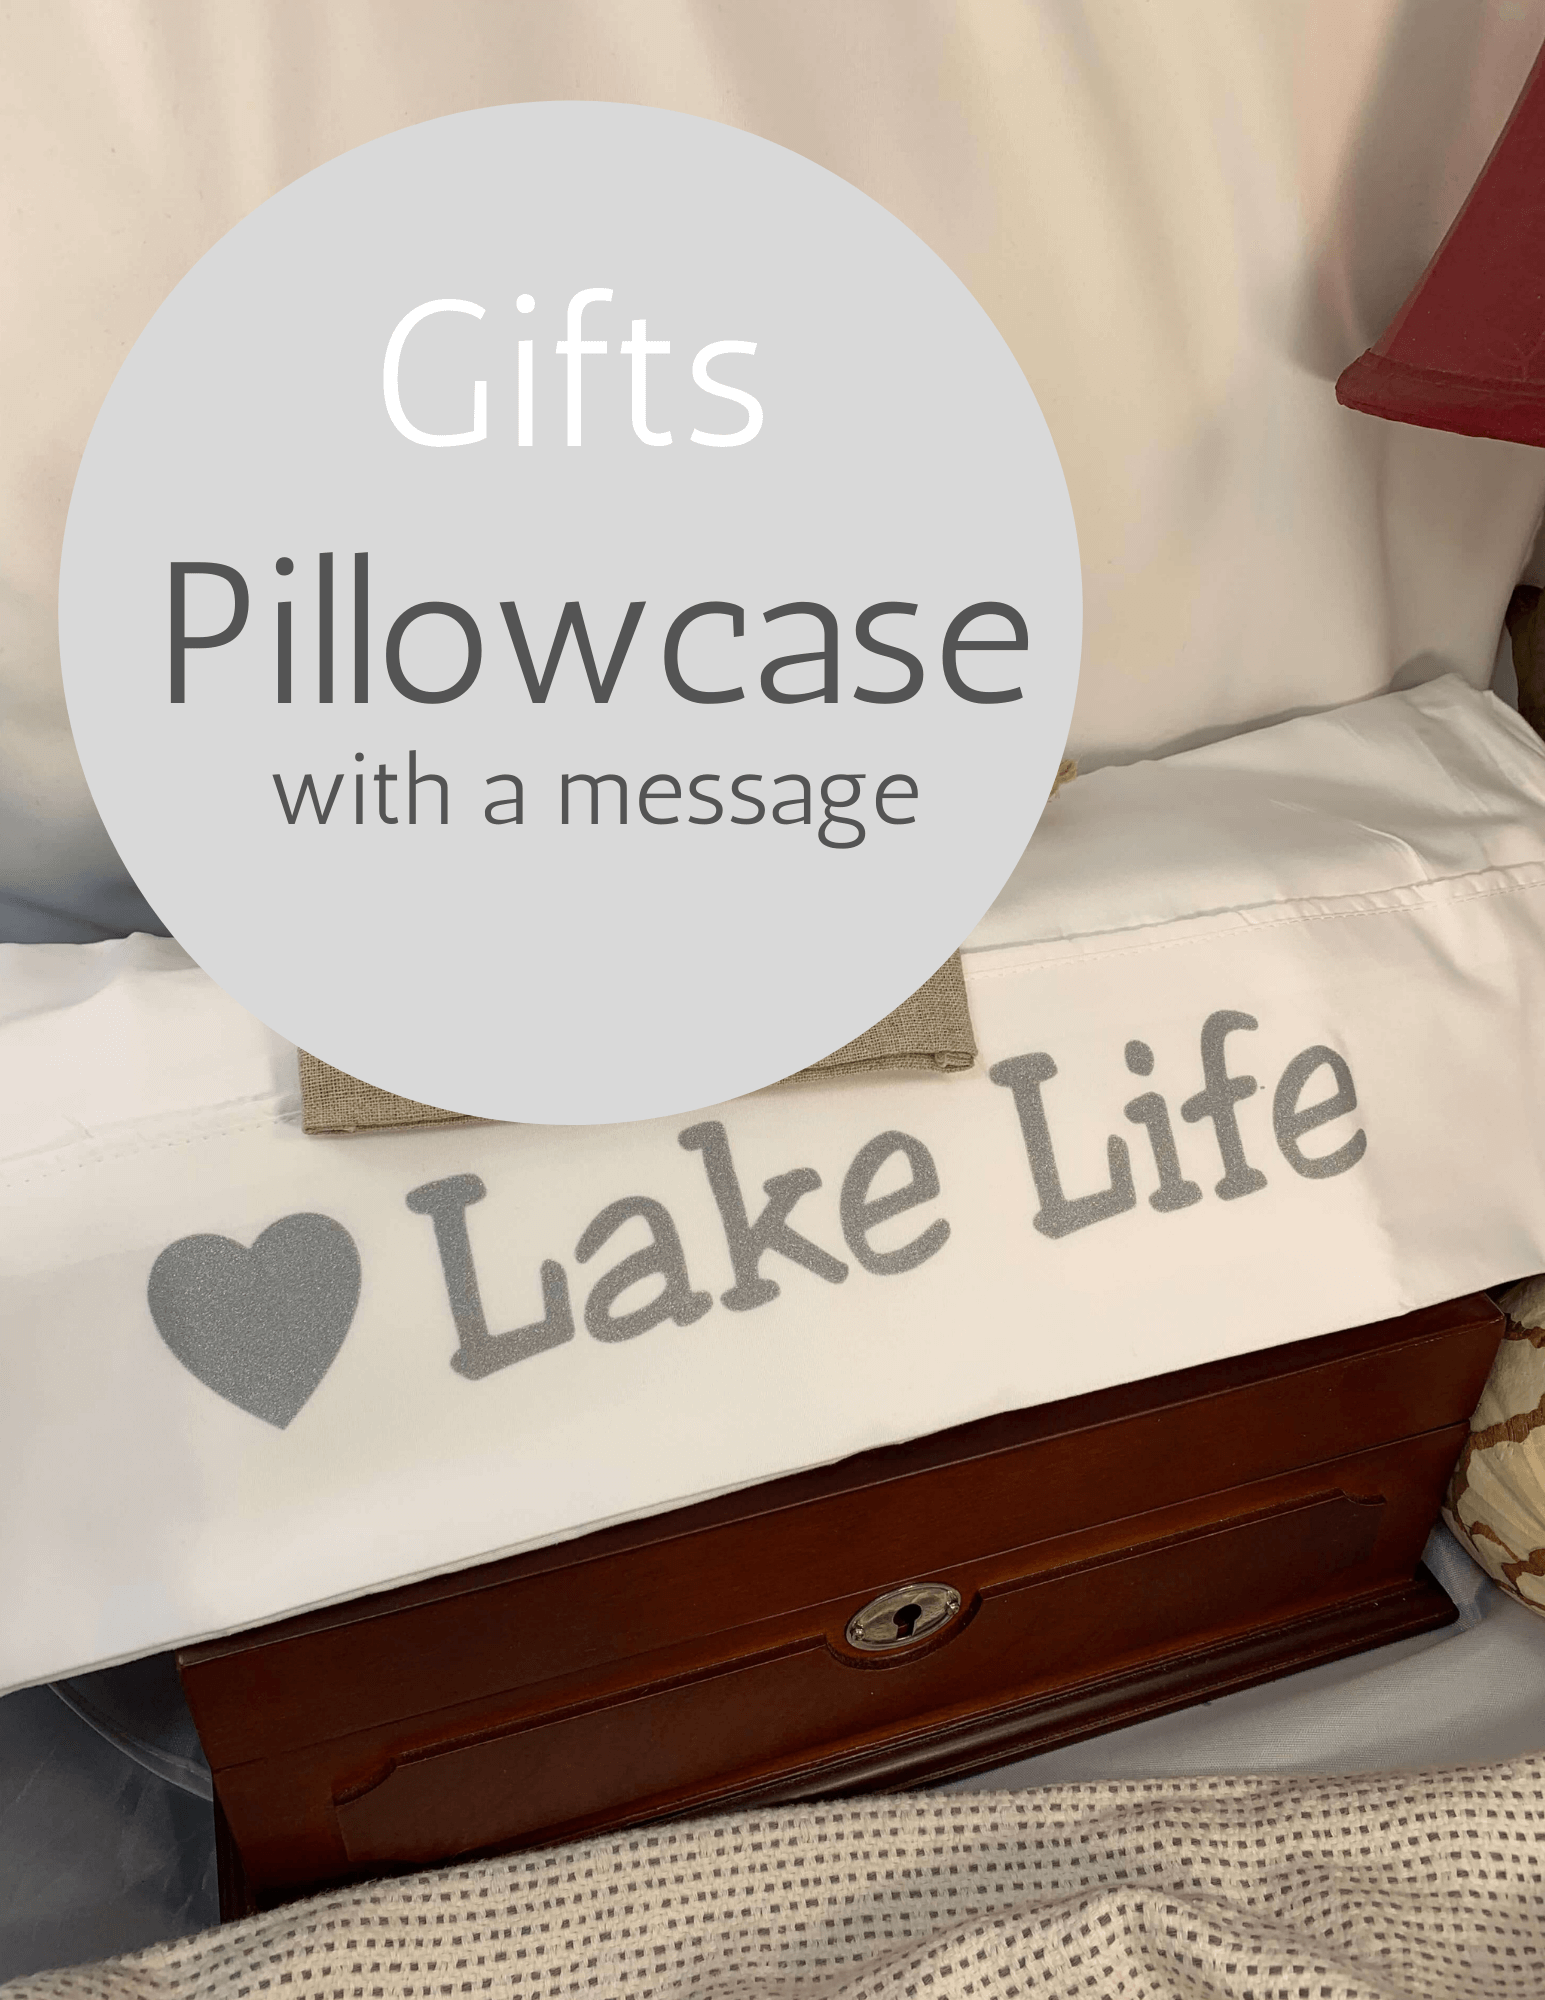 (Heart) Lake Life - Pillowcase with a Message